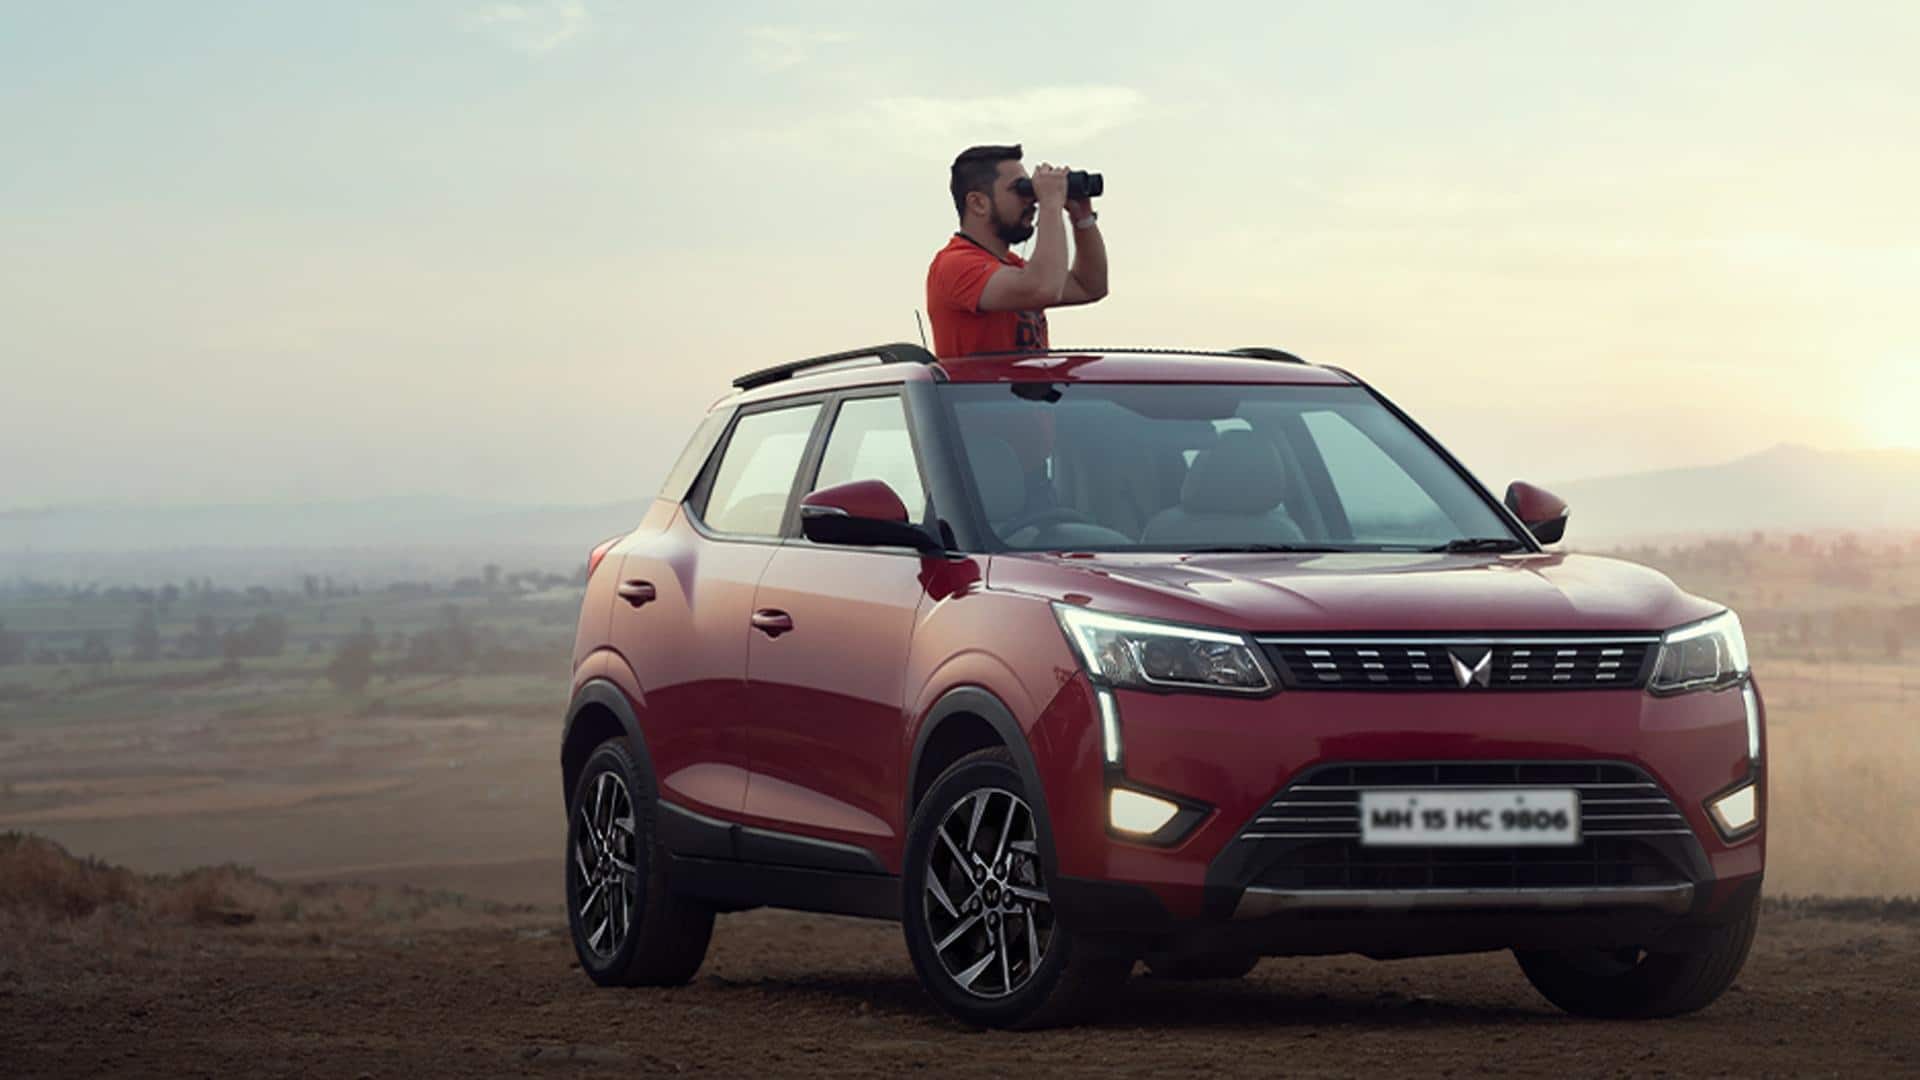 Mahindra offering discounts worth Rs. 1.8L on XUV300 this February